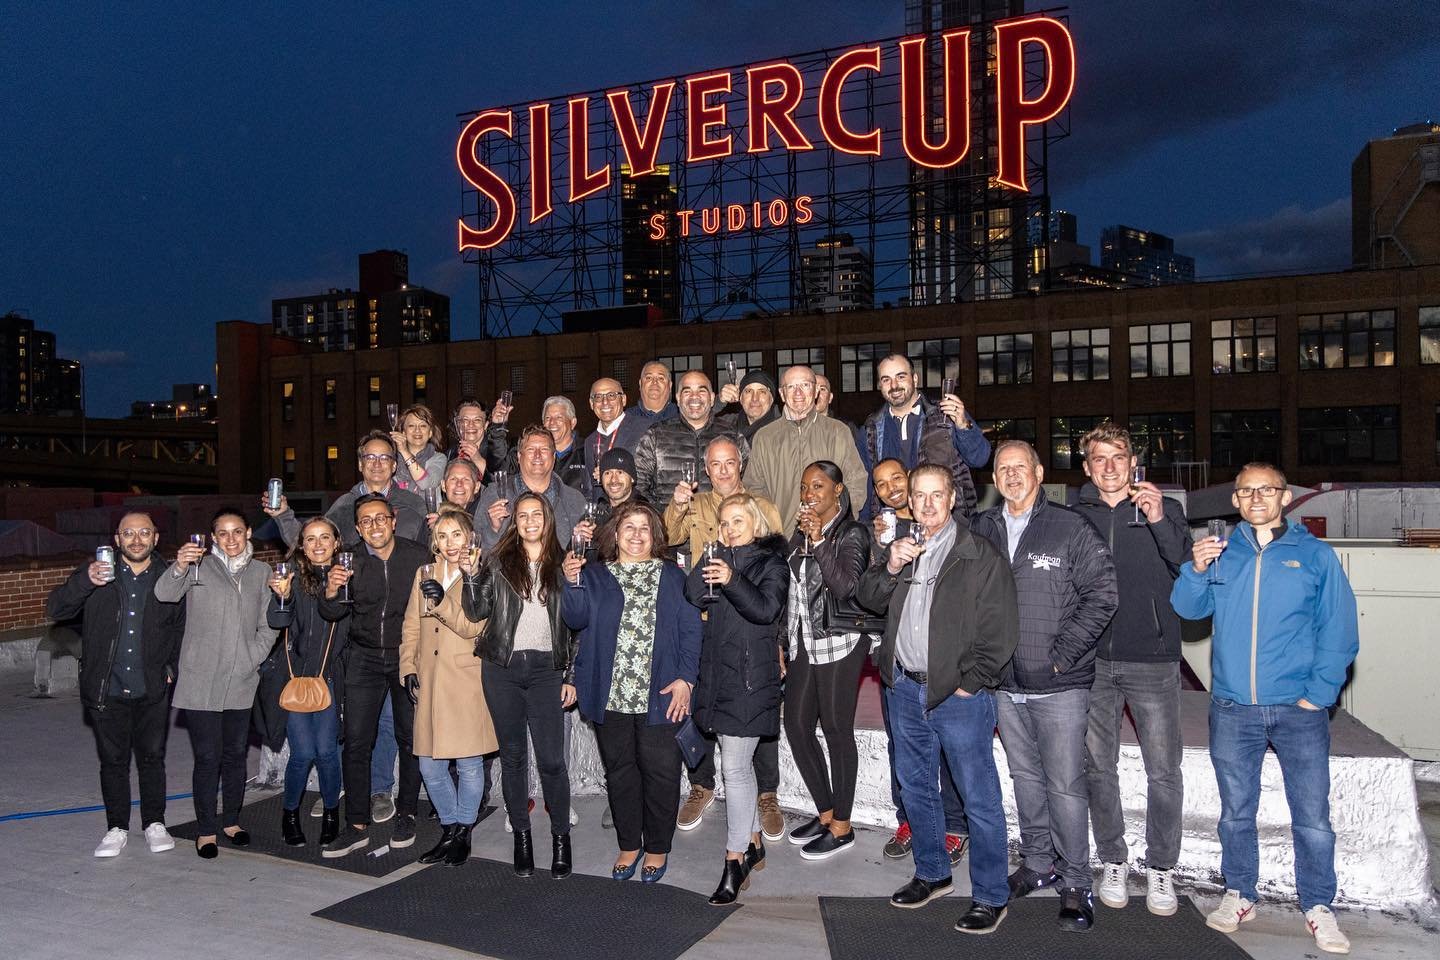 Cheers to International Workers Day from all of us at Silvercup Studios! 🥂🌃Throwback to our illumination event and the unveiling of our restored Silvercup sign. Let&rsquo;s celebrate the hard work of our staff not only today but every day!

#Silver